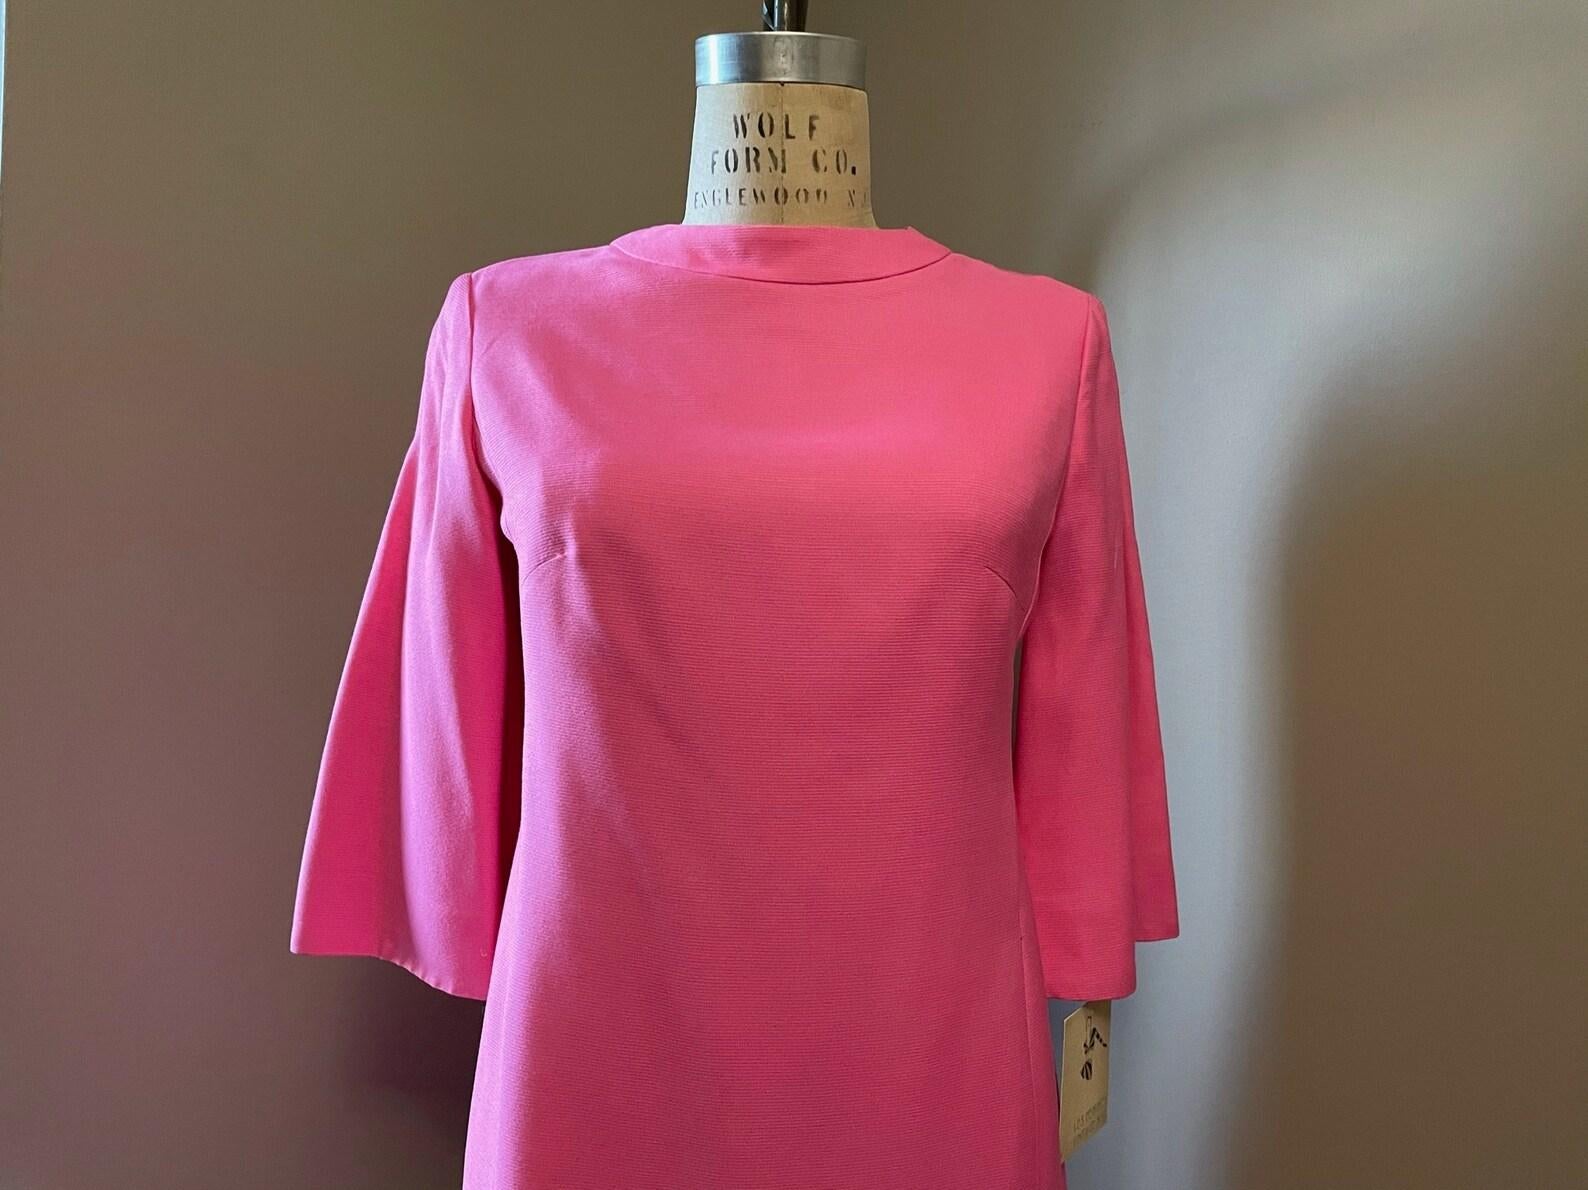 ○ 1960s Suzy Perette pretty pink dress!
○ shift silhouette
○ round collar
○ 3/4 length bell sleeves
○ dress falls to knee length
○ fully lined in pink silk taffeta
○ back metal zip closure

Circa 1960s
Suzy Perette
Pink
Excellent Condition. No